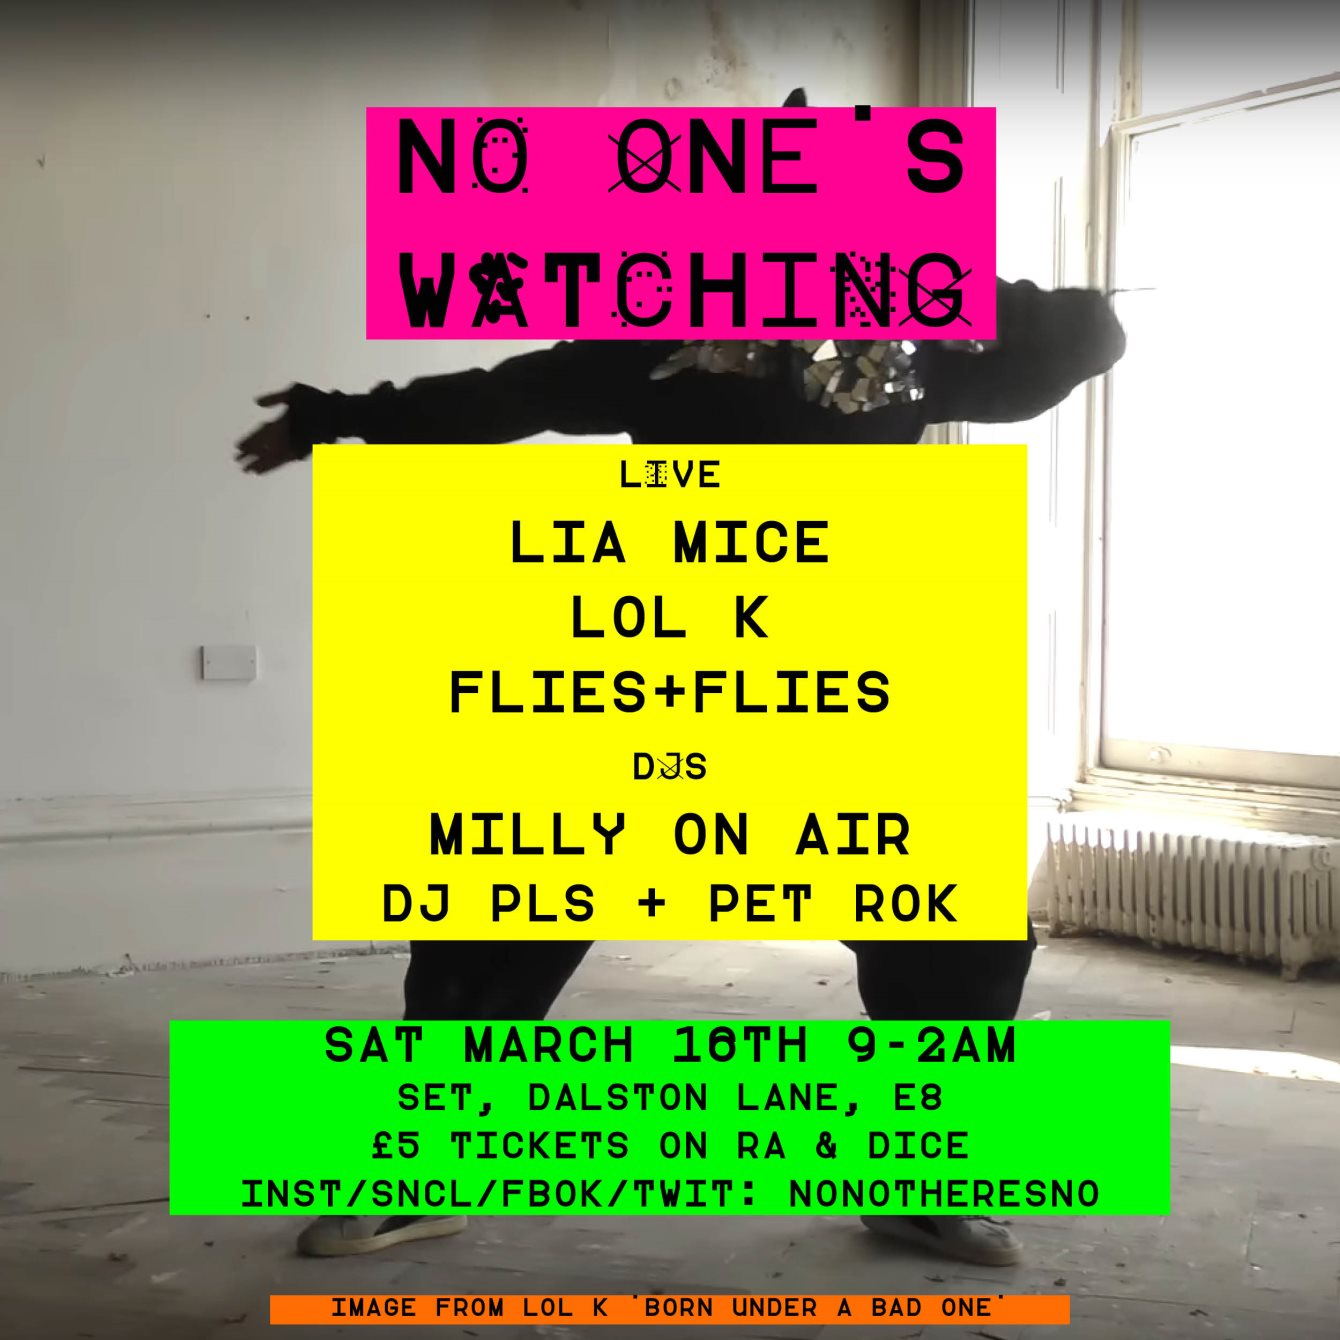 No One's Watching with Lia Mice, Lol K, Flies+Flies & Milly on Air - Flyer front